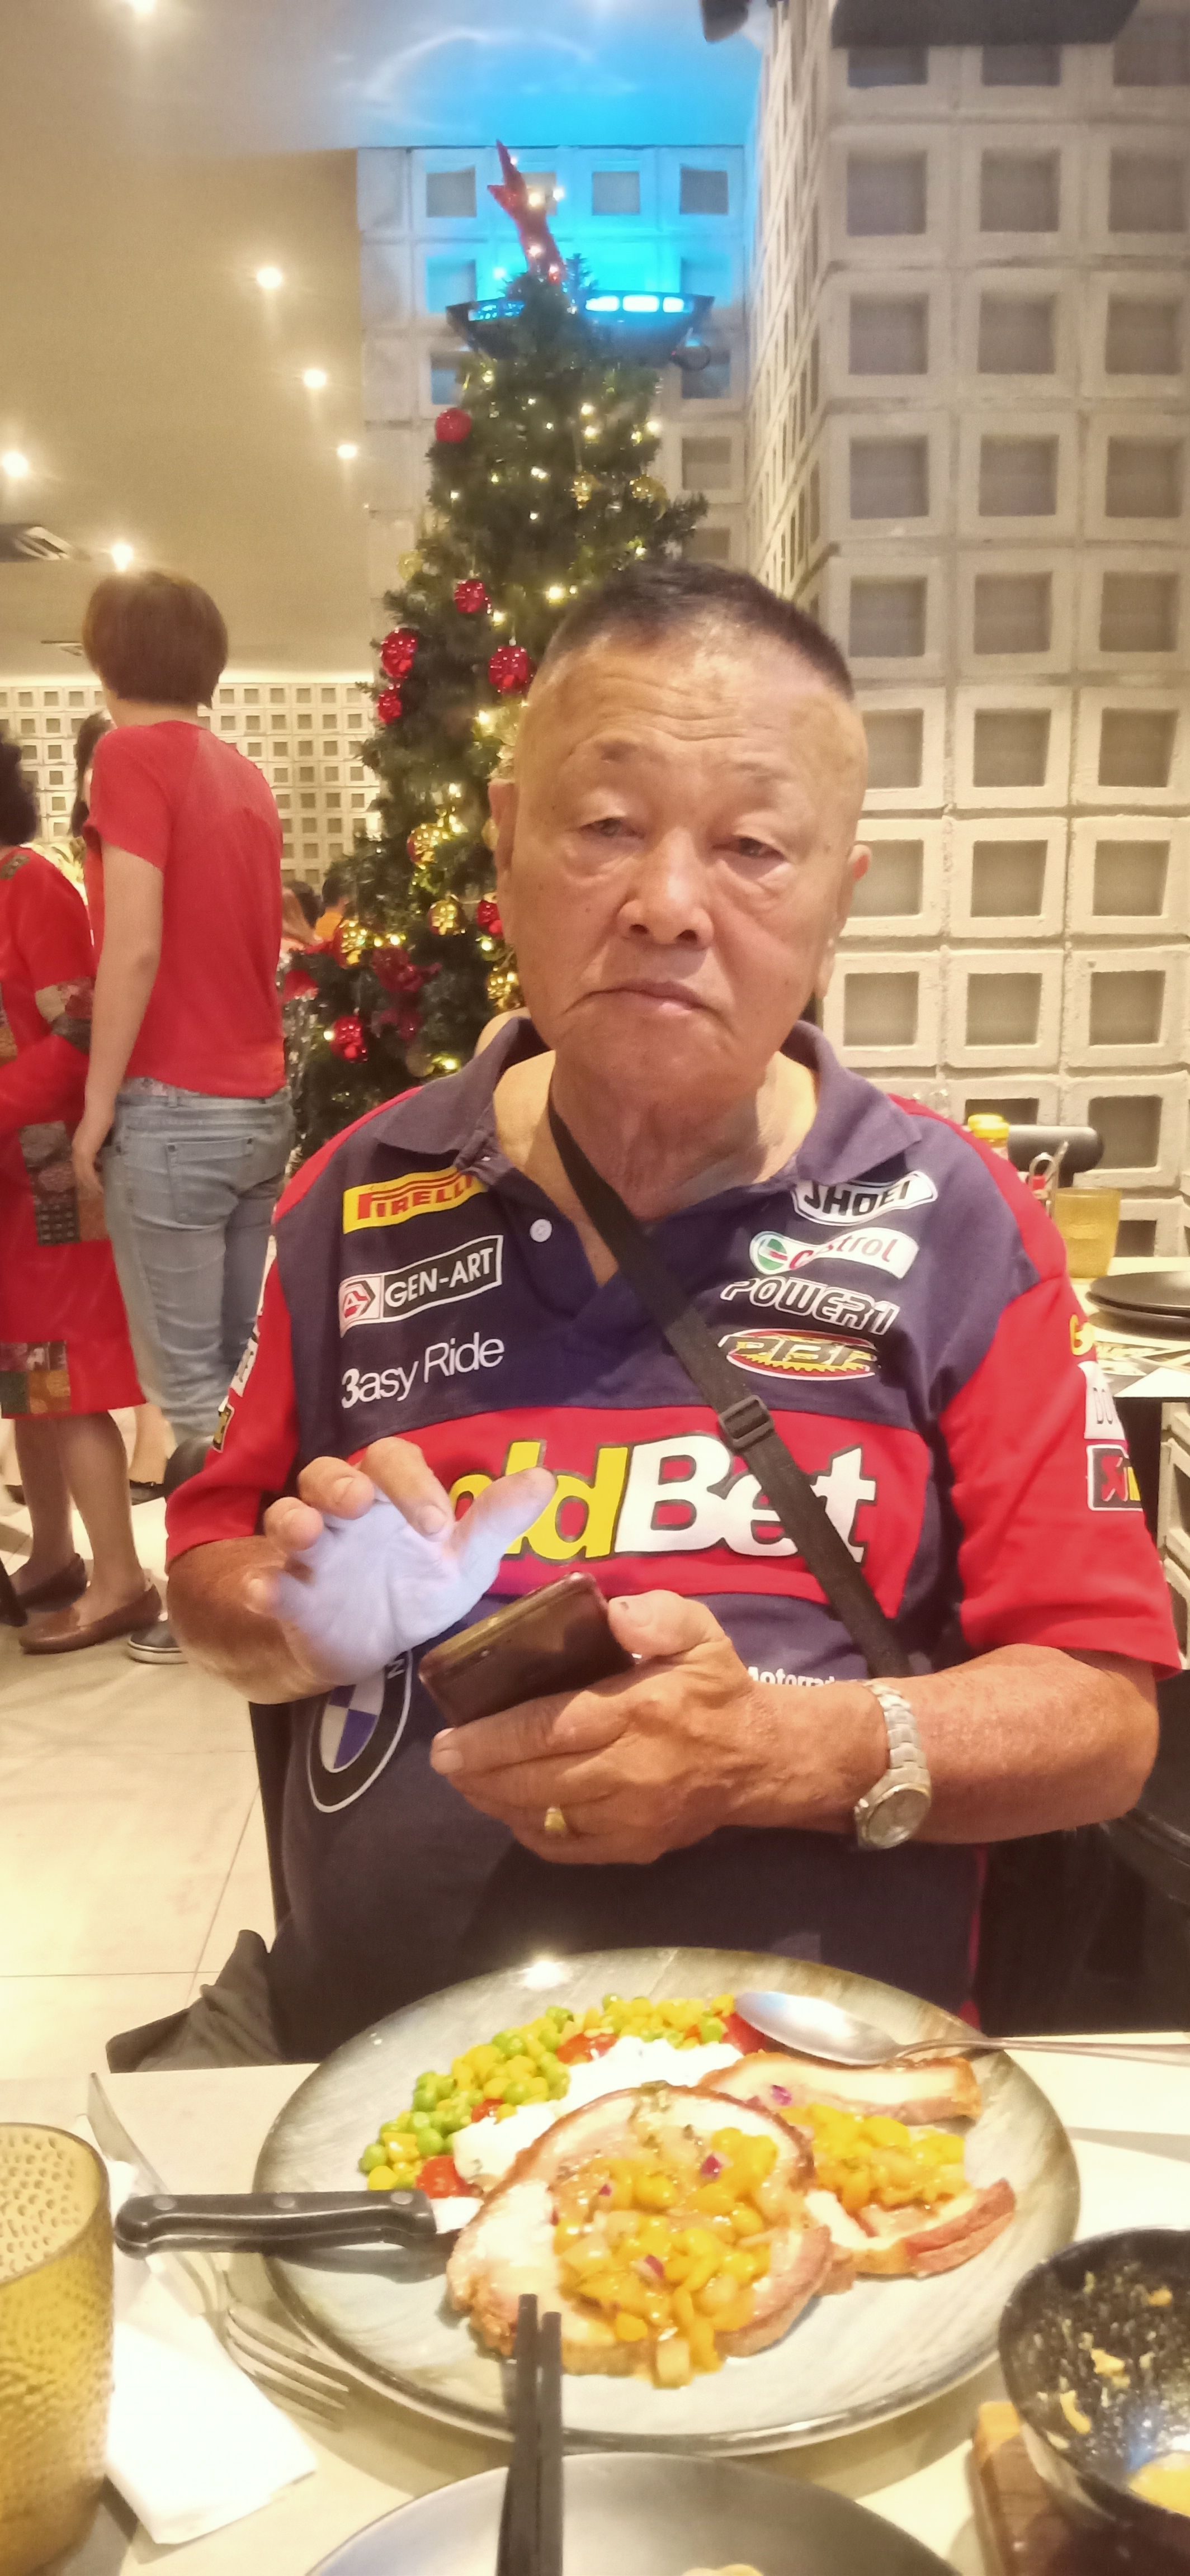 Lee Tam Sing holds his phone at the dinner table. He wears a collared T-shirt, a sling bag and a silver watch. He has short cropped hair. In the background is a Christmas tree.